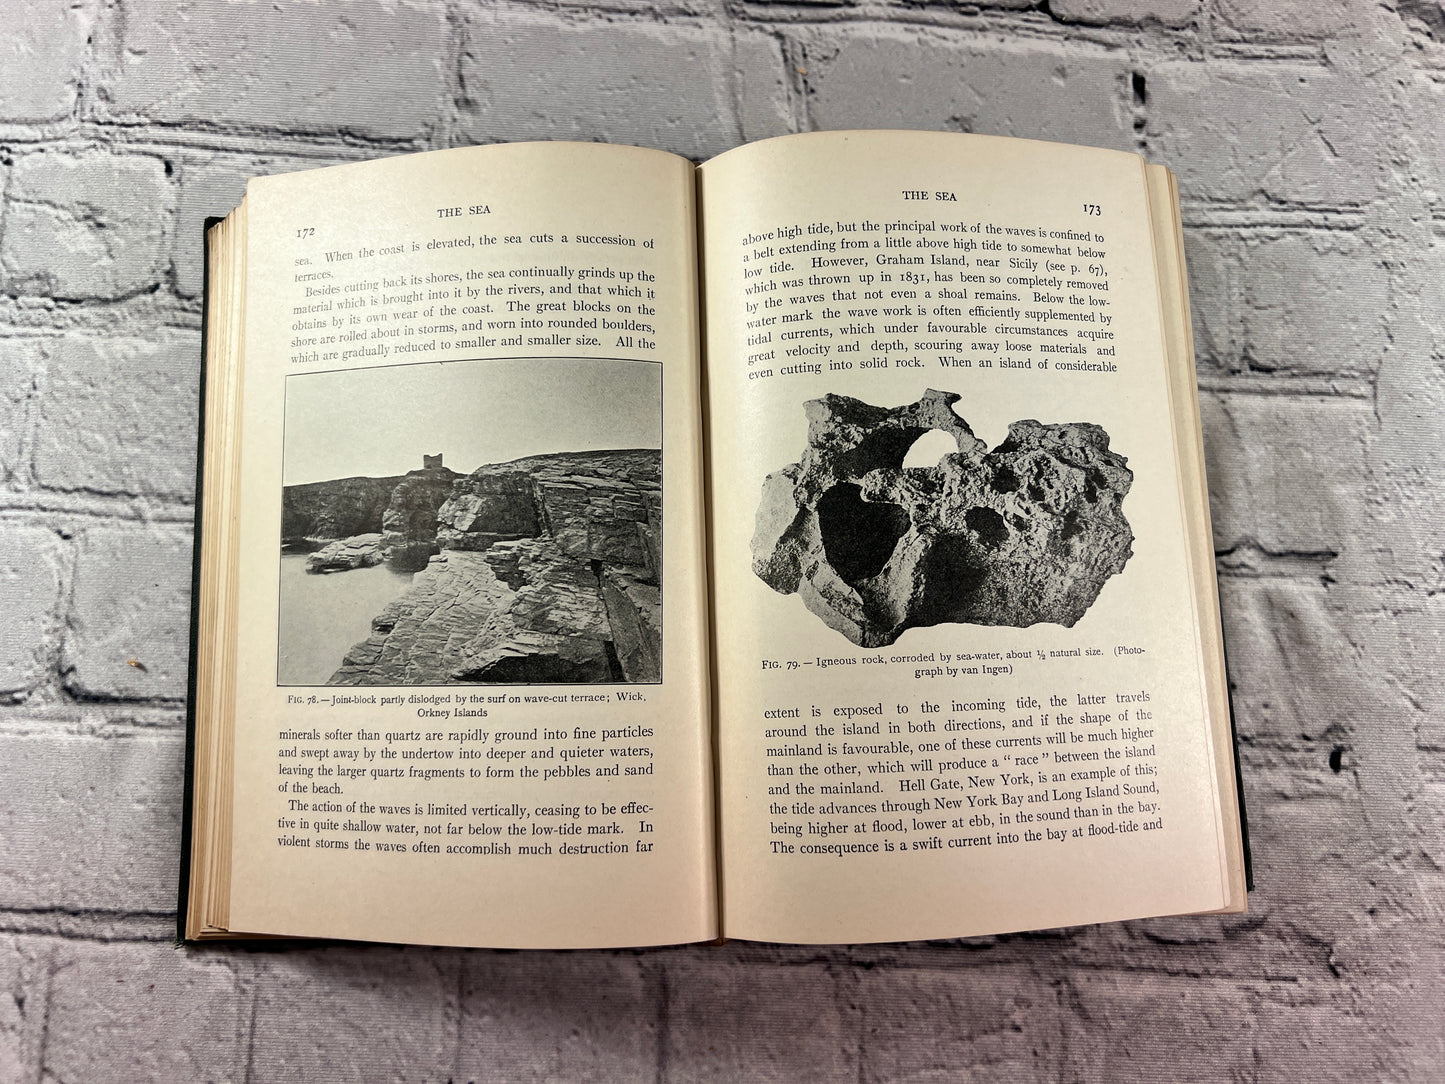 An Introduction to Geology by W.B. Scott [1922]